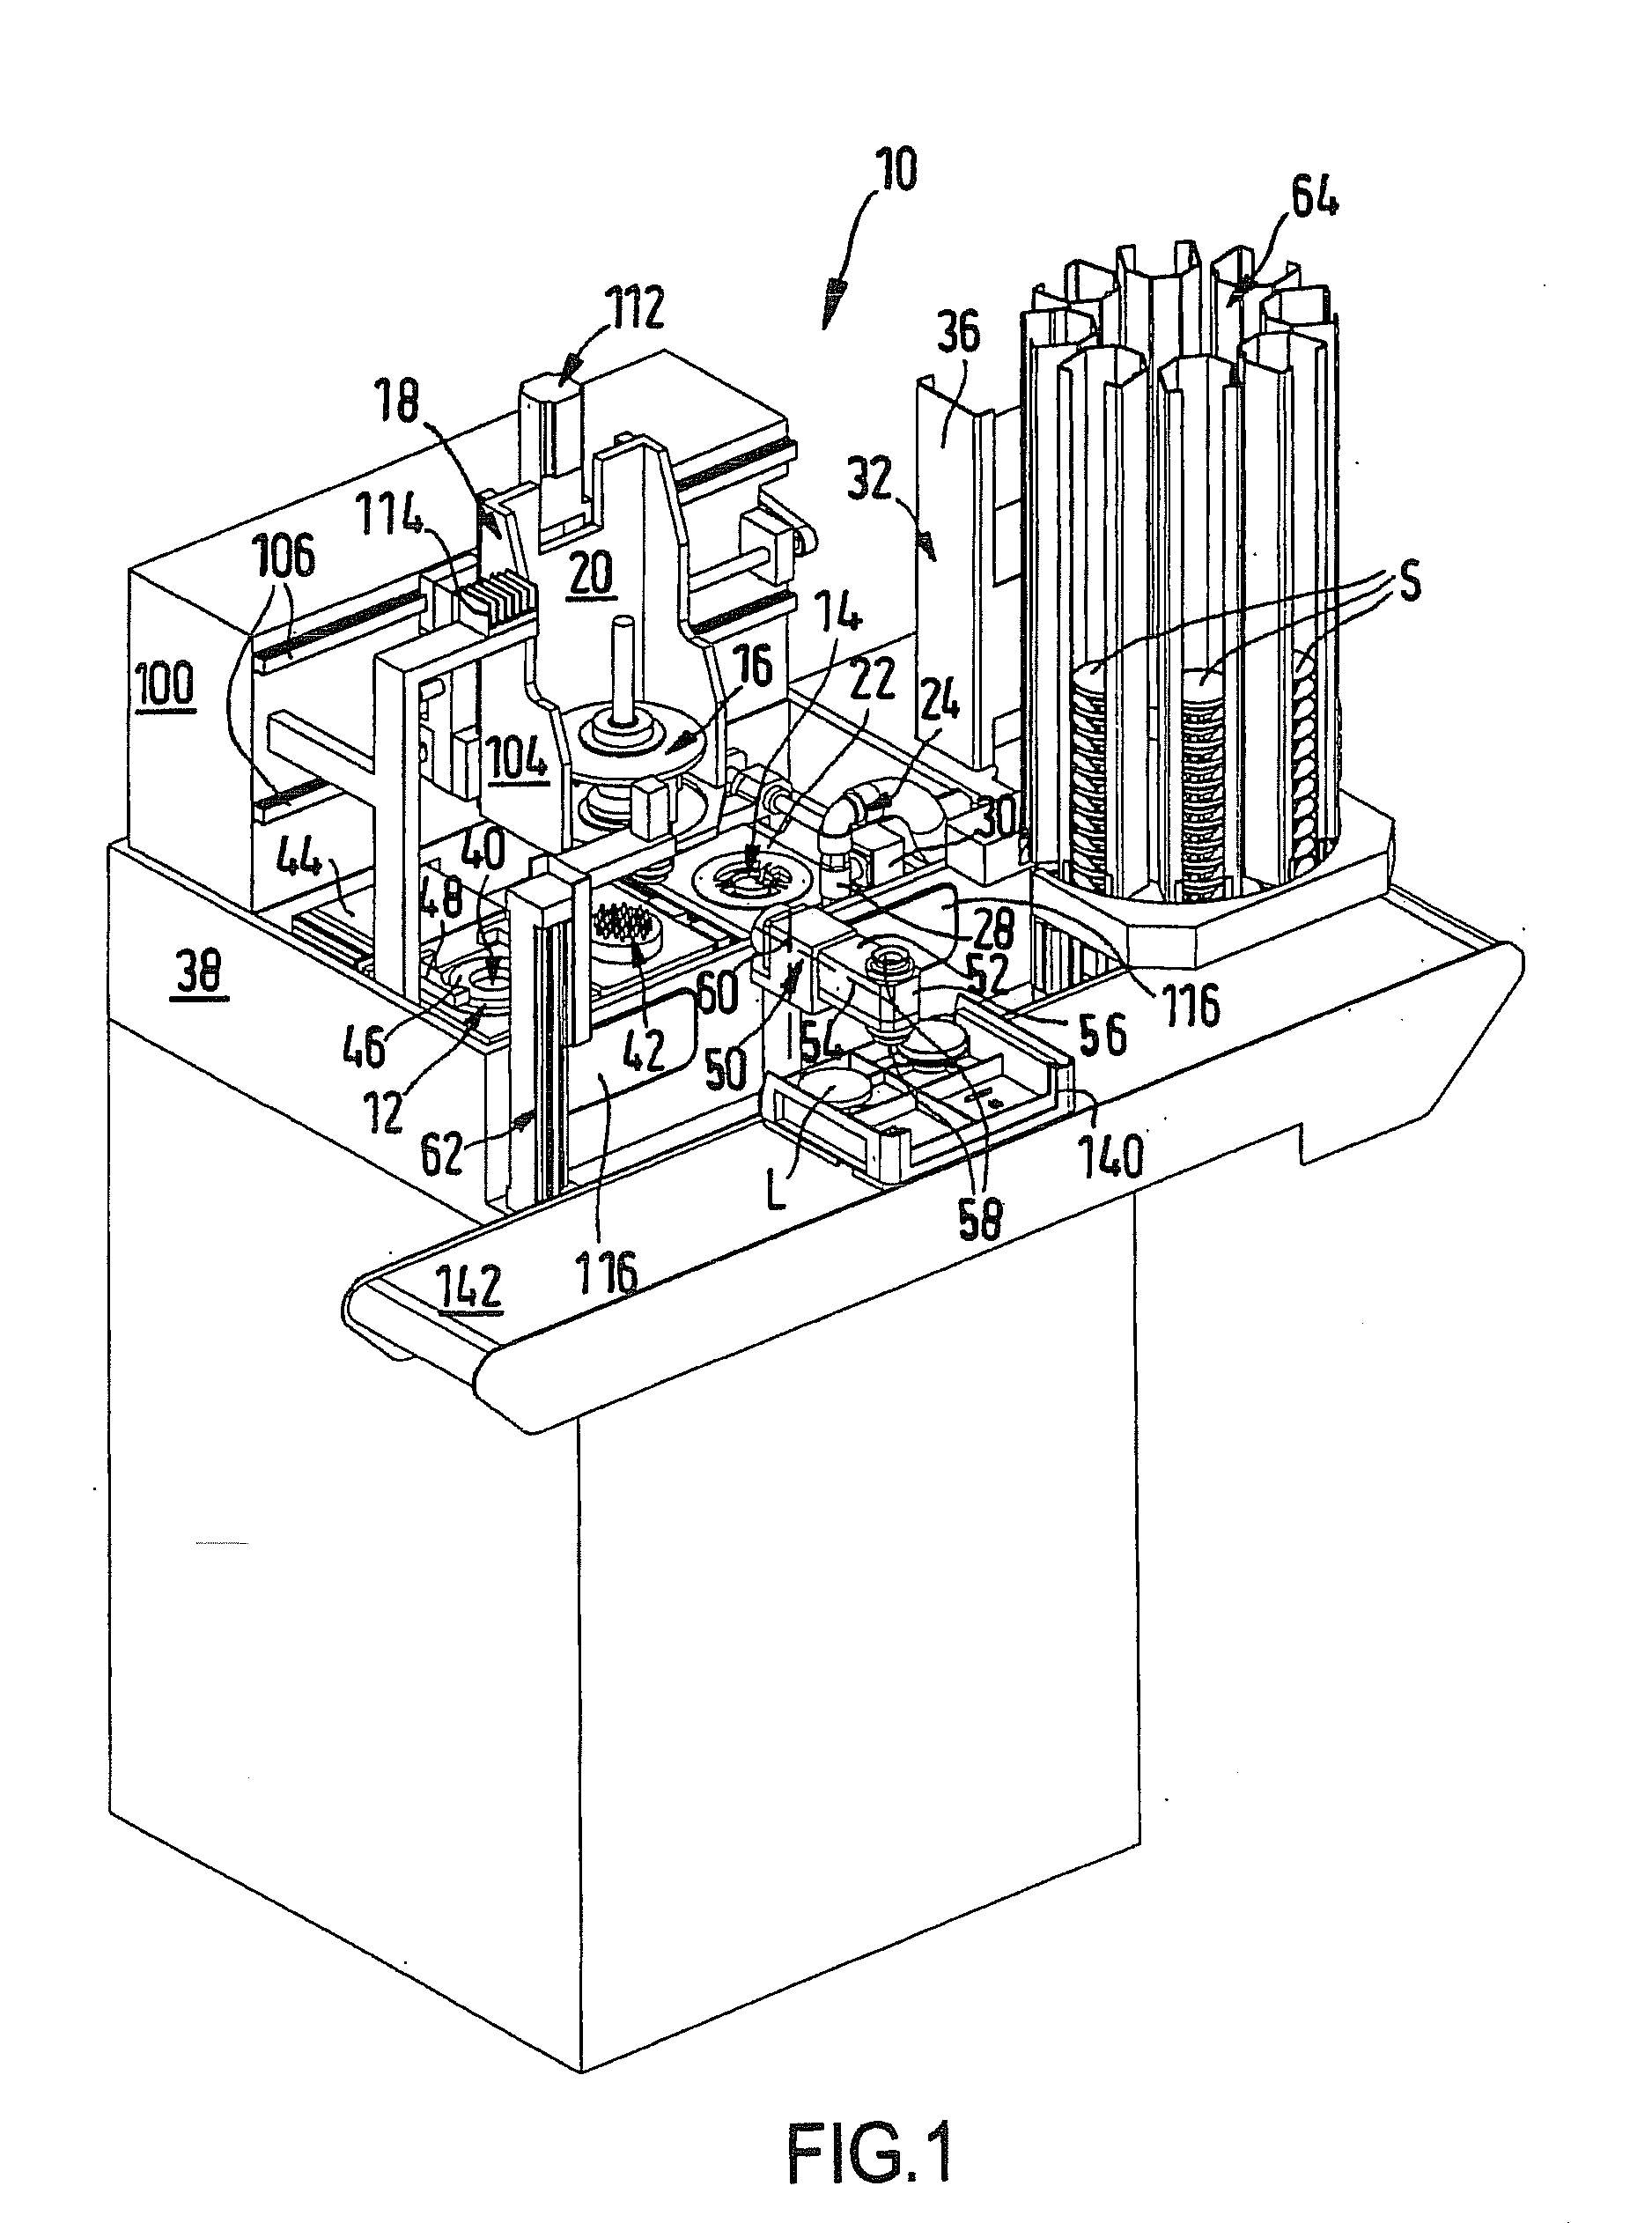 Device For Blocking Workpieces, Particularly Spectacle Lenses, For The Processing And/Or Coating Thereof